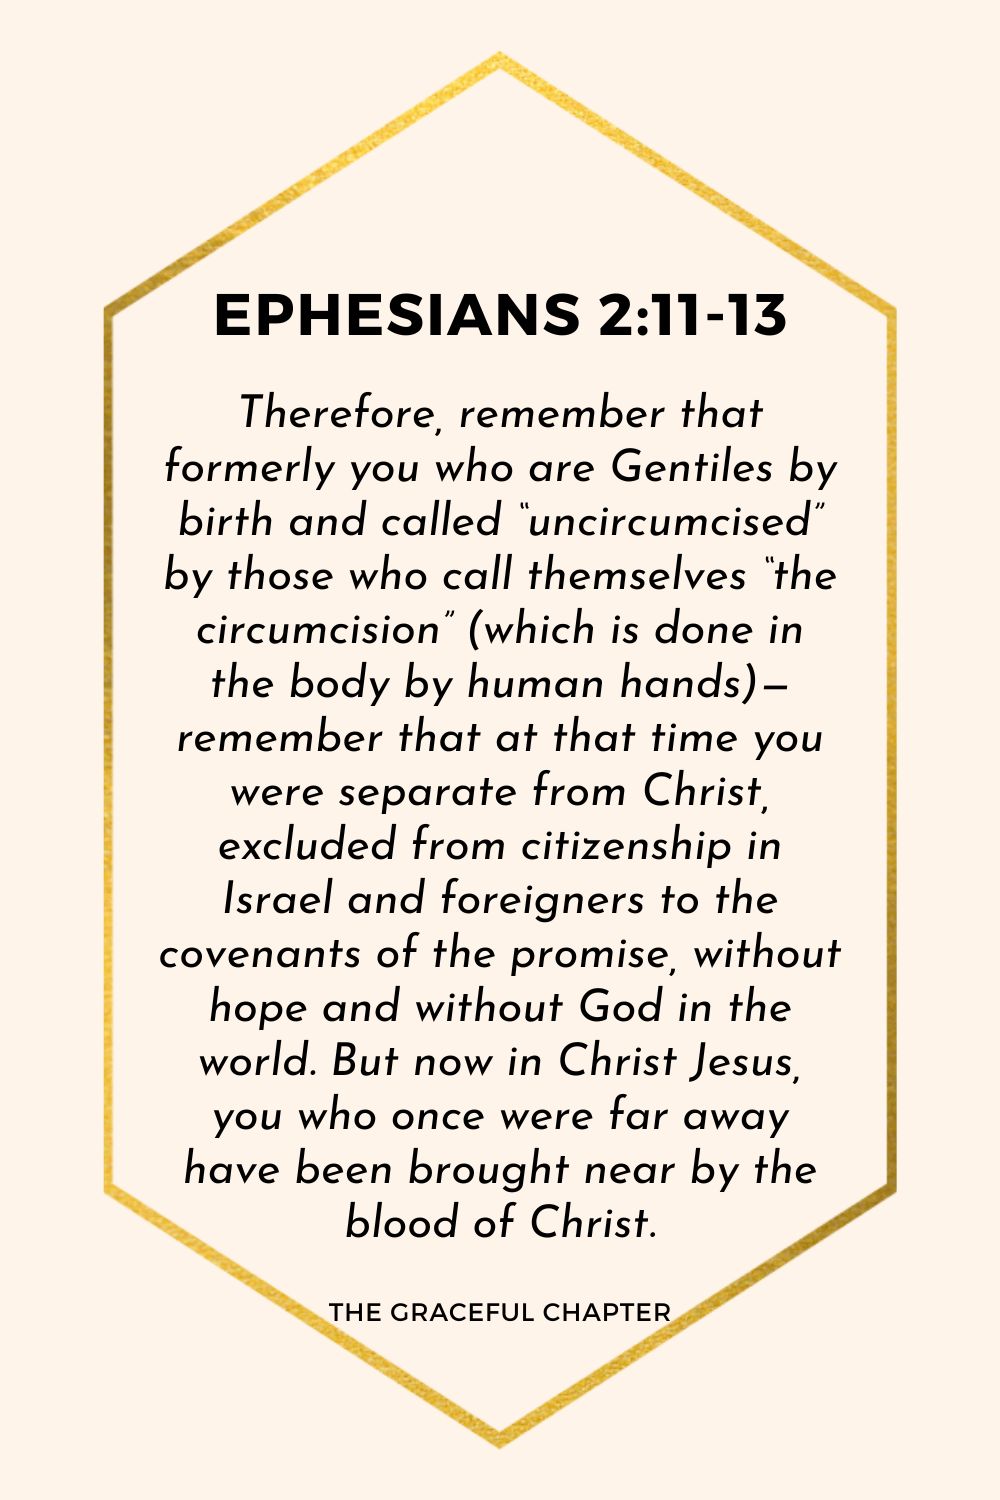 Therefore, remember that formerly you who are Gentiles by birth and called “uncircumcised” by those who call themselves “the circumcision” (which is done in the body by human hands)— remember that at that time you were separate from Christ, excluded from citizenship in Israel and foreigners to the covenants of the promise, without hope and without God in the world. But now in Christ Jesus, you who once were far away have been brought near by the blood of Christ. Ephesians 2:11-13 